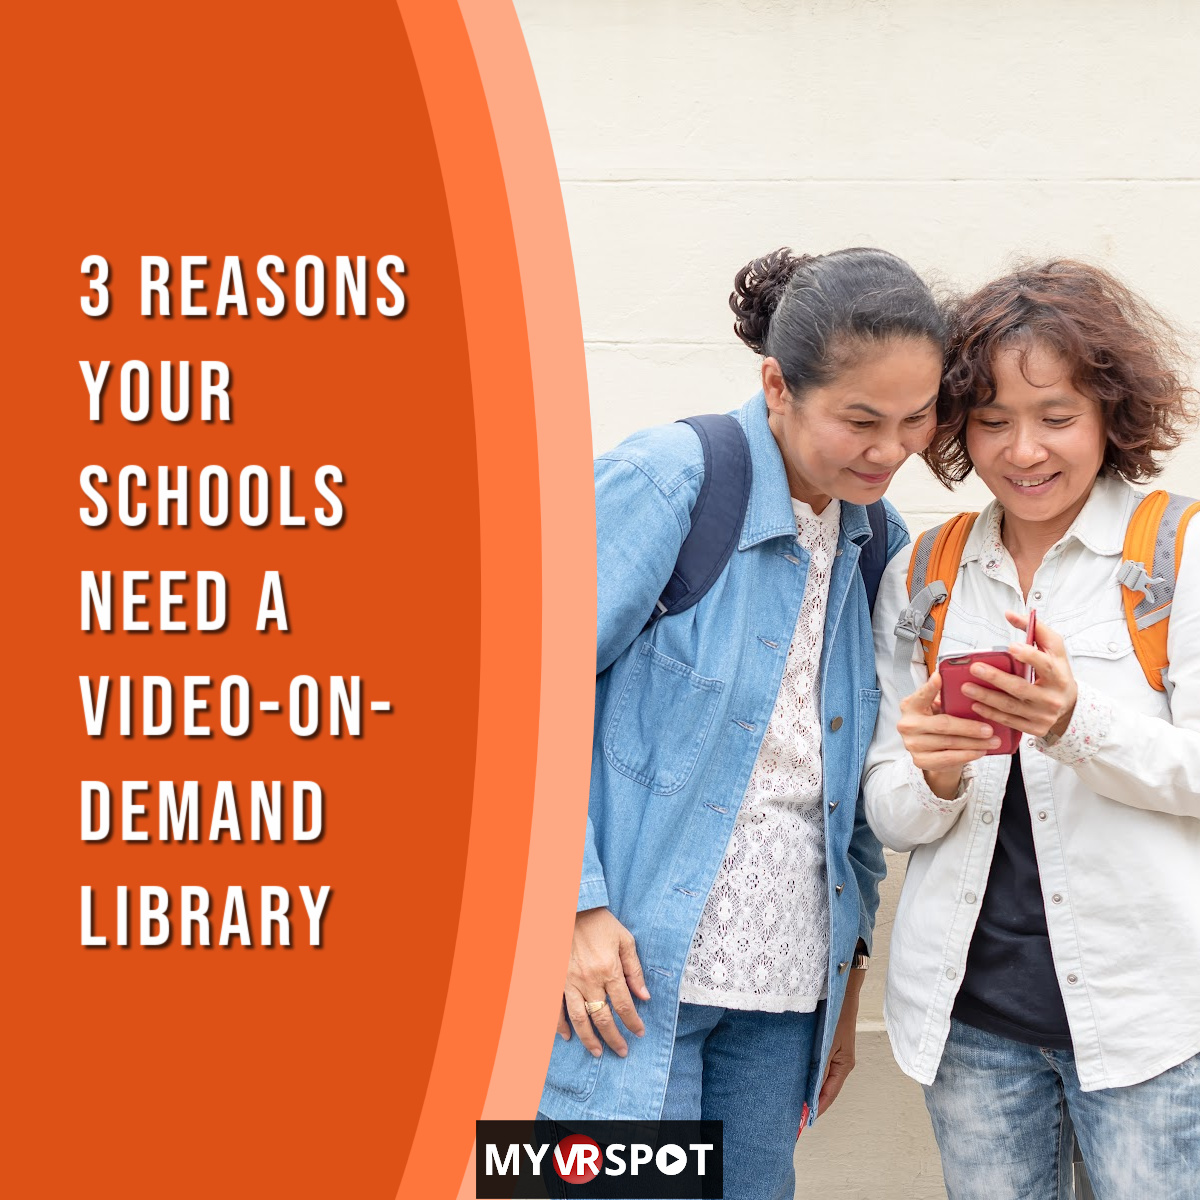 3 Reasons Your Schools Need a Video-on-Demand Library